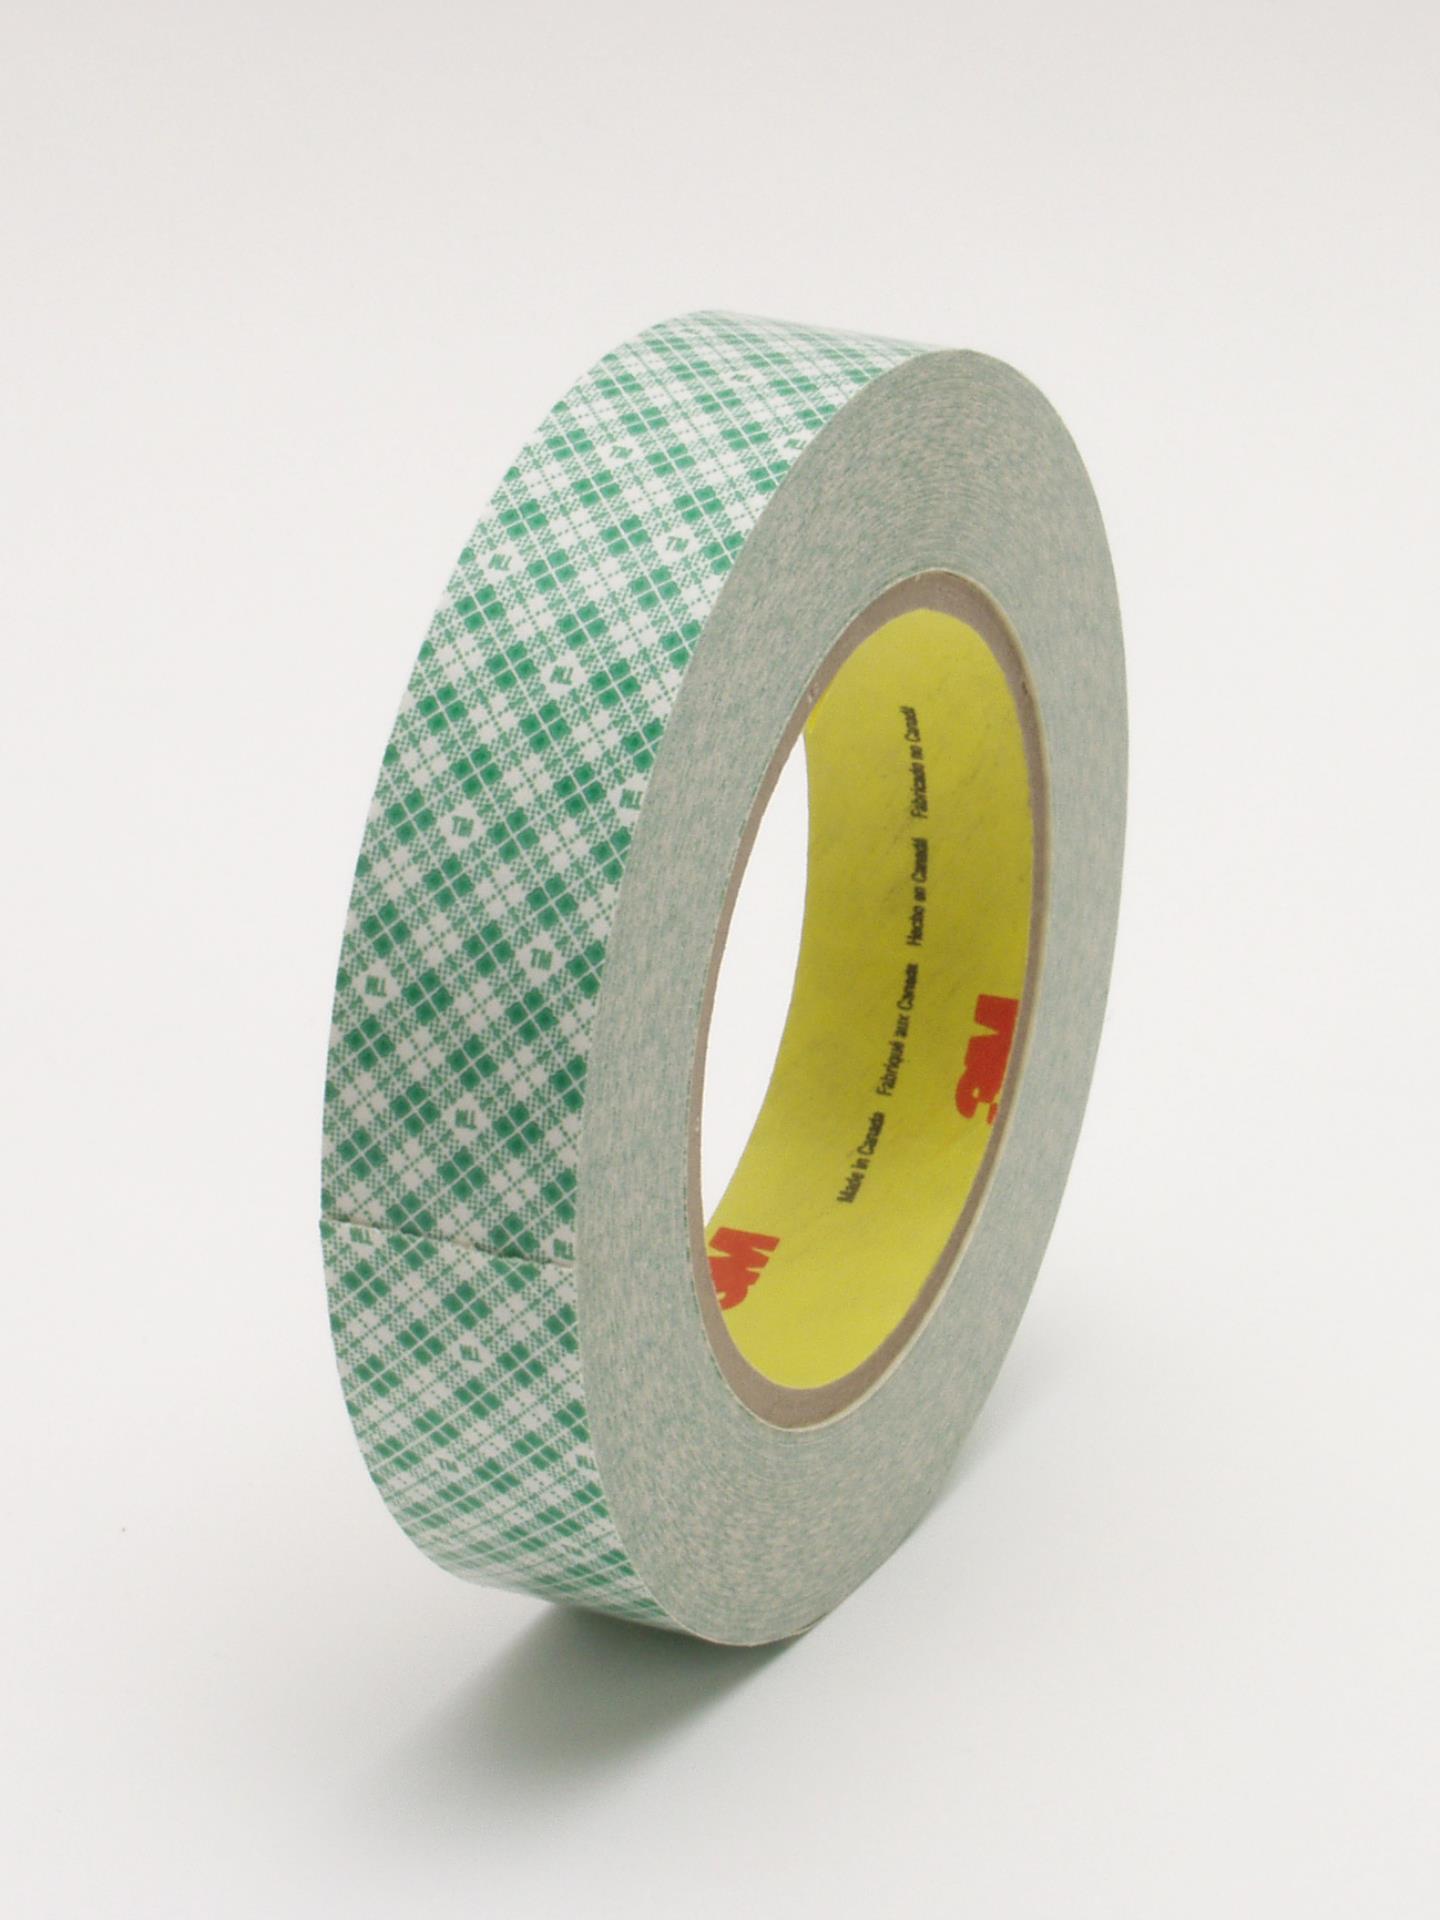 3M Double Sided Tape Super Strong Foam Tape for Outdoor and Indoor 0.25in x 15ft HPP Heavy Duty Mounting Tape Converted from 3M VHB 5952,